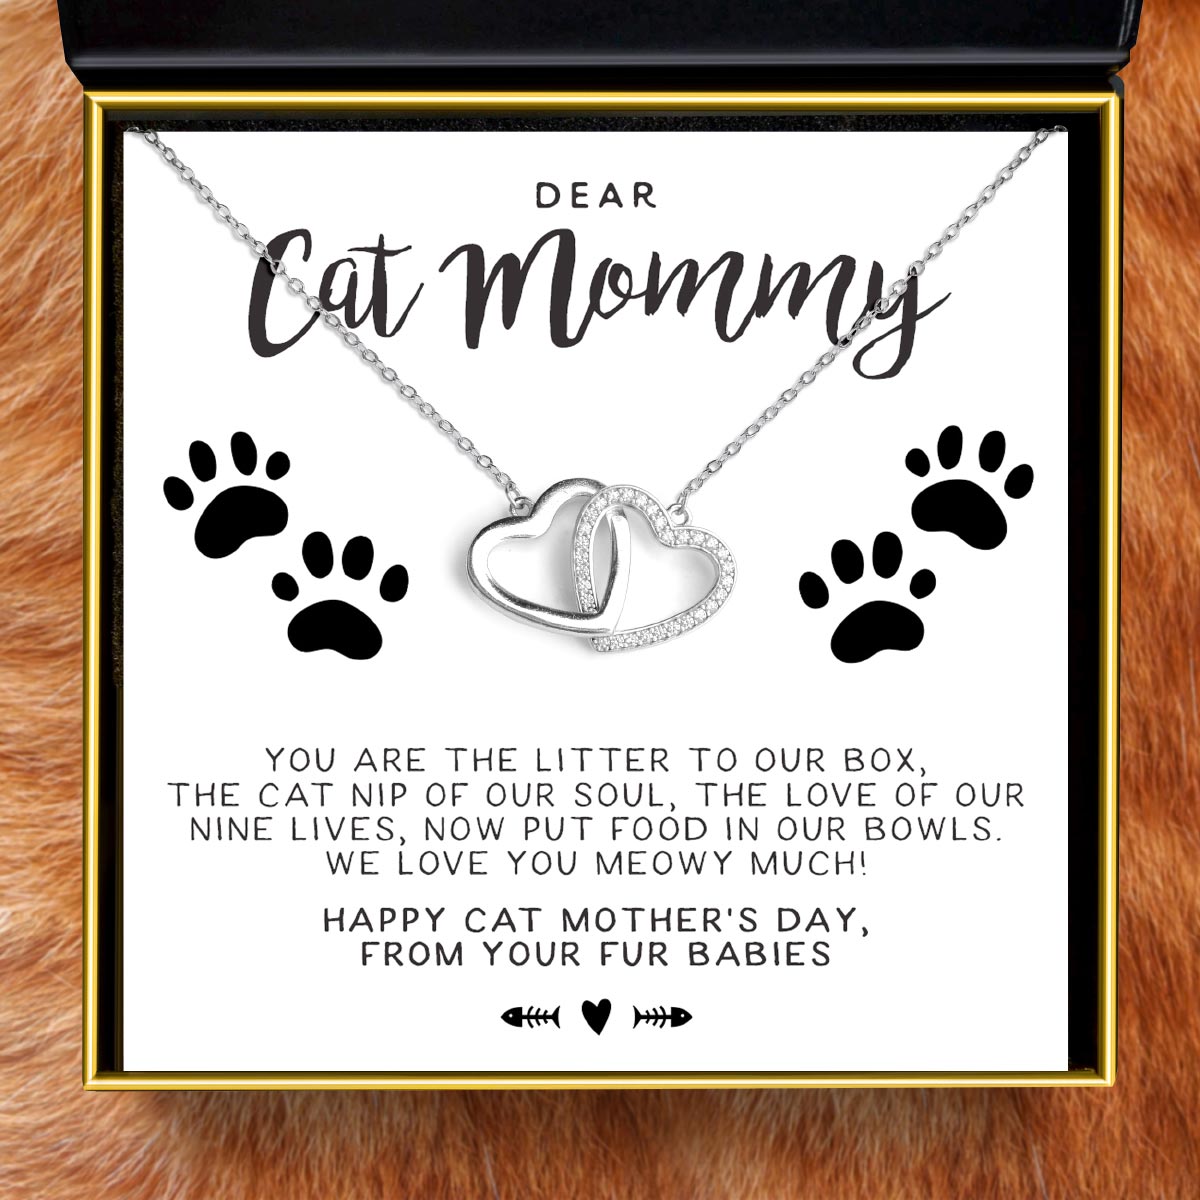 To My Cat Mommy On Mother's Day - Sterling Silver Joined Hearts Necklace Gift Set